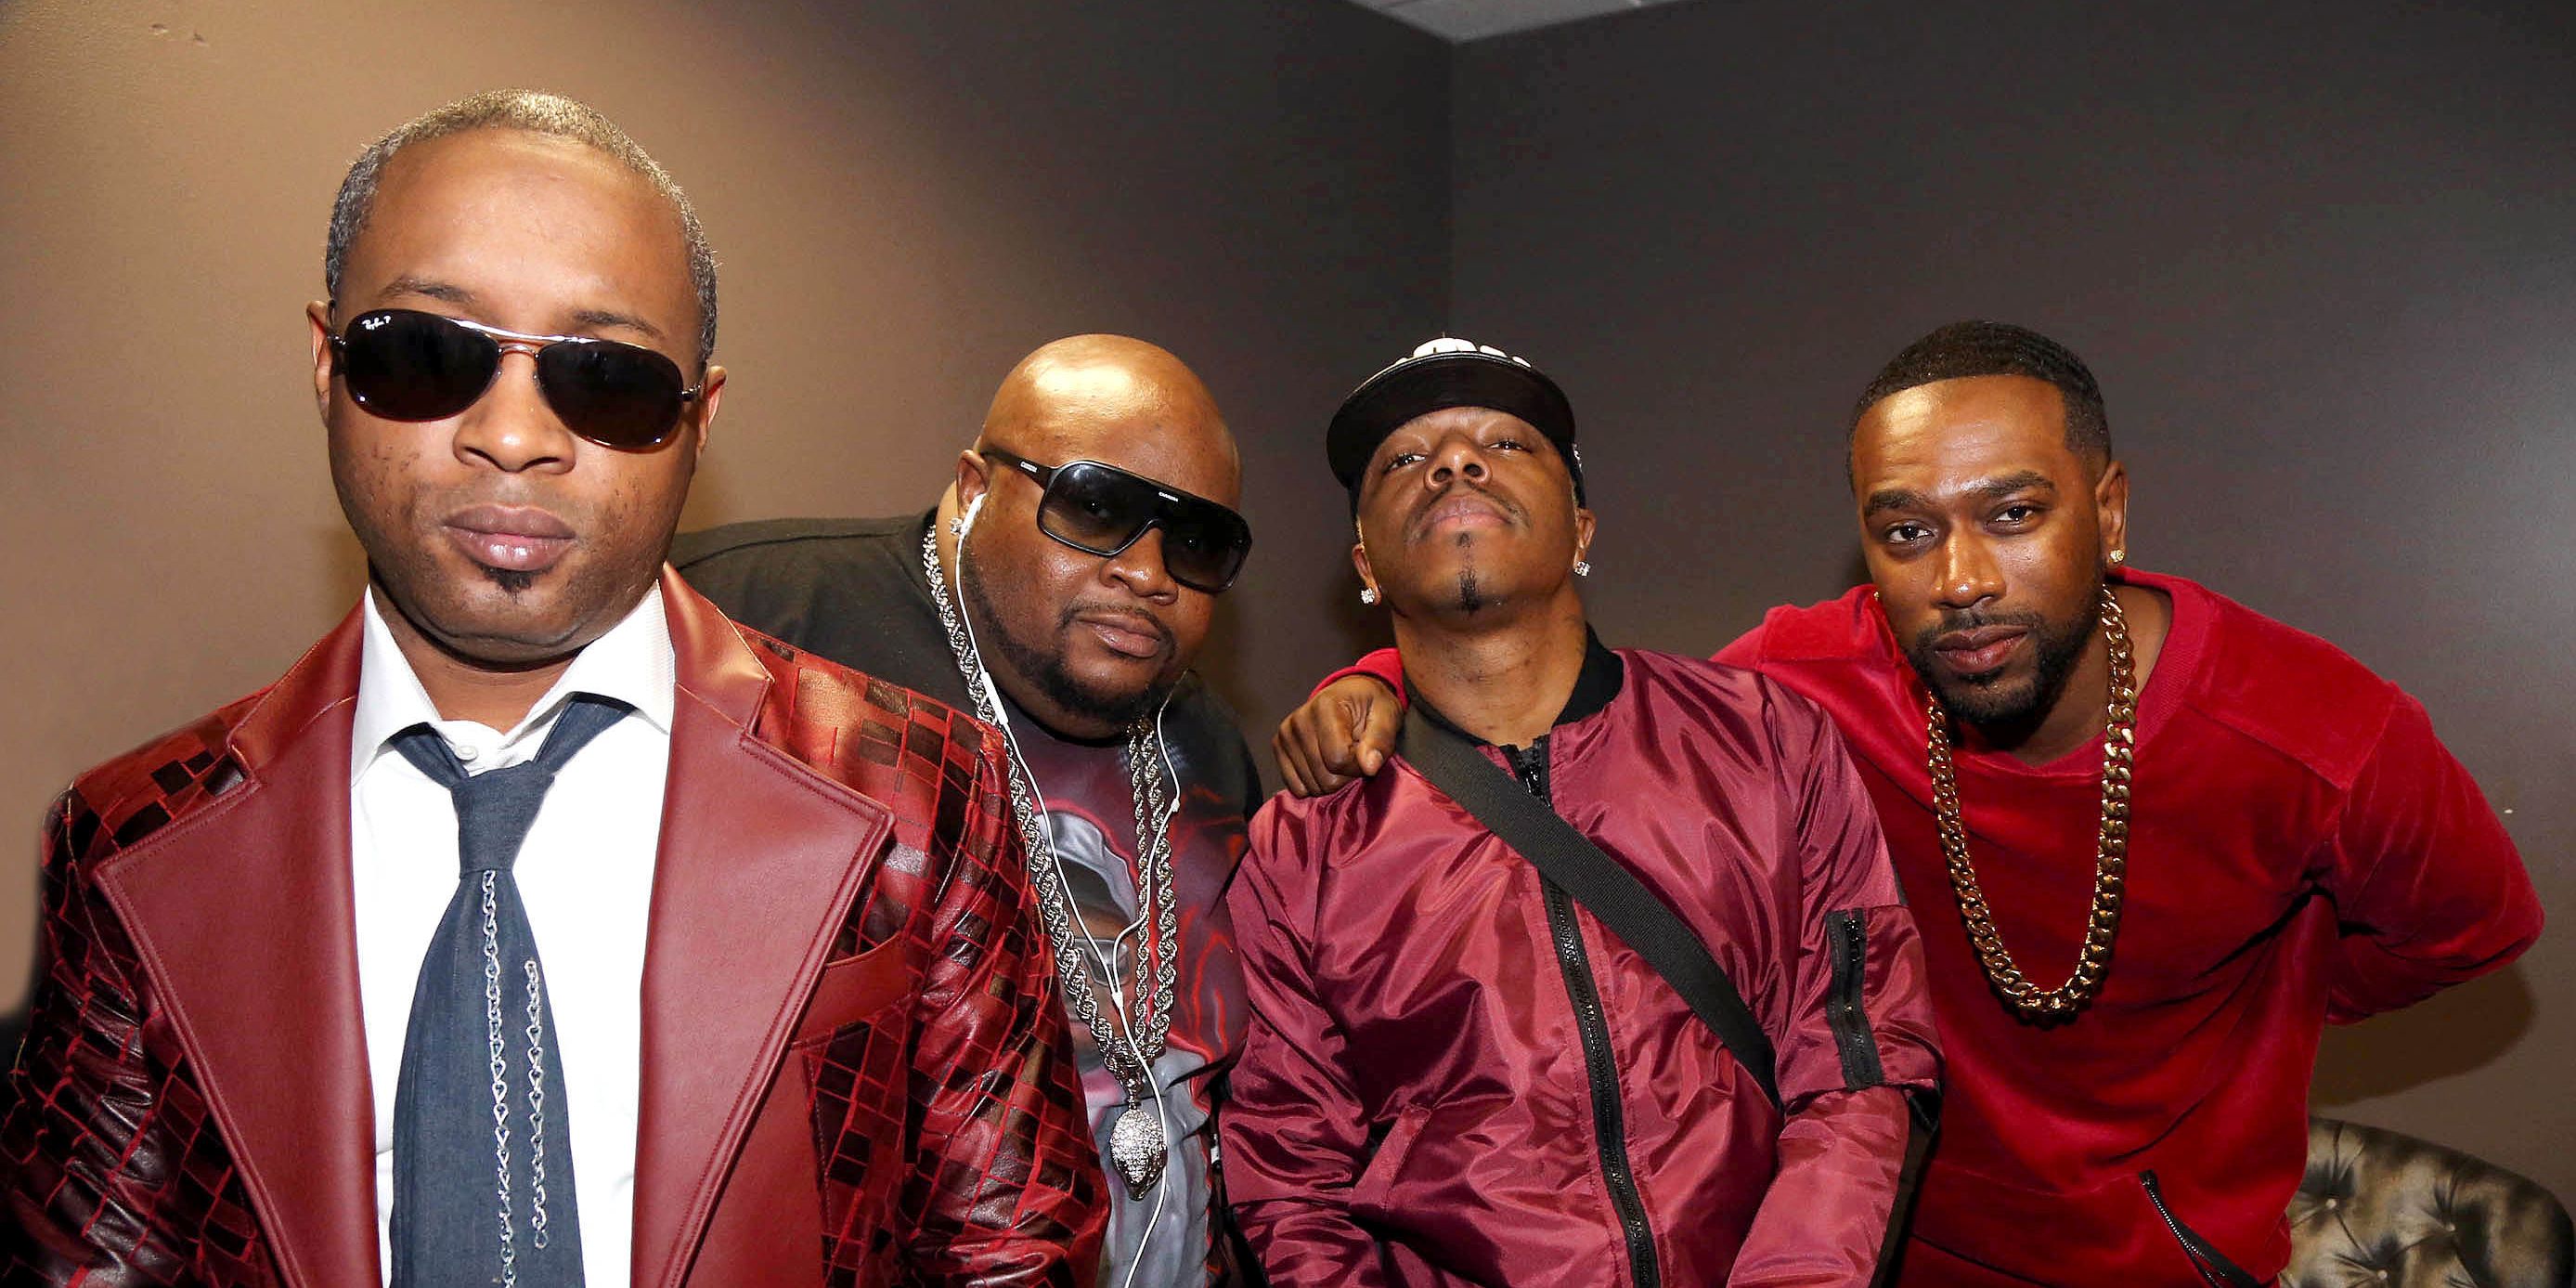 Dru Hill Drop 'Christmas in Baltimore' EP, Their First Project in 7 Years | HipHop-N-More2775 x 1387